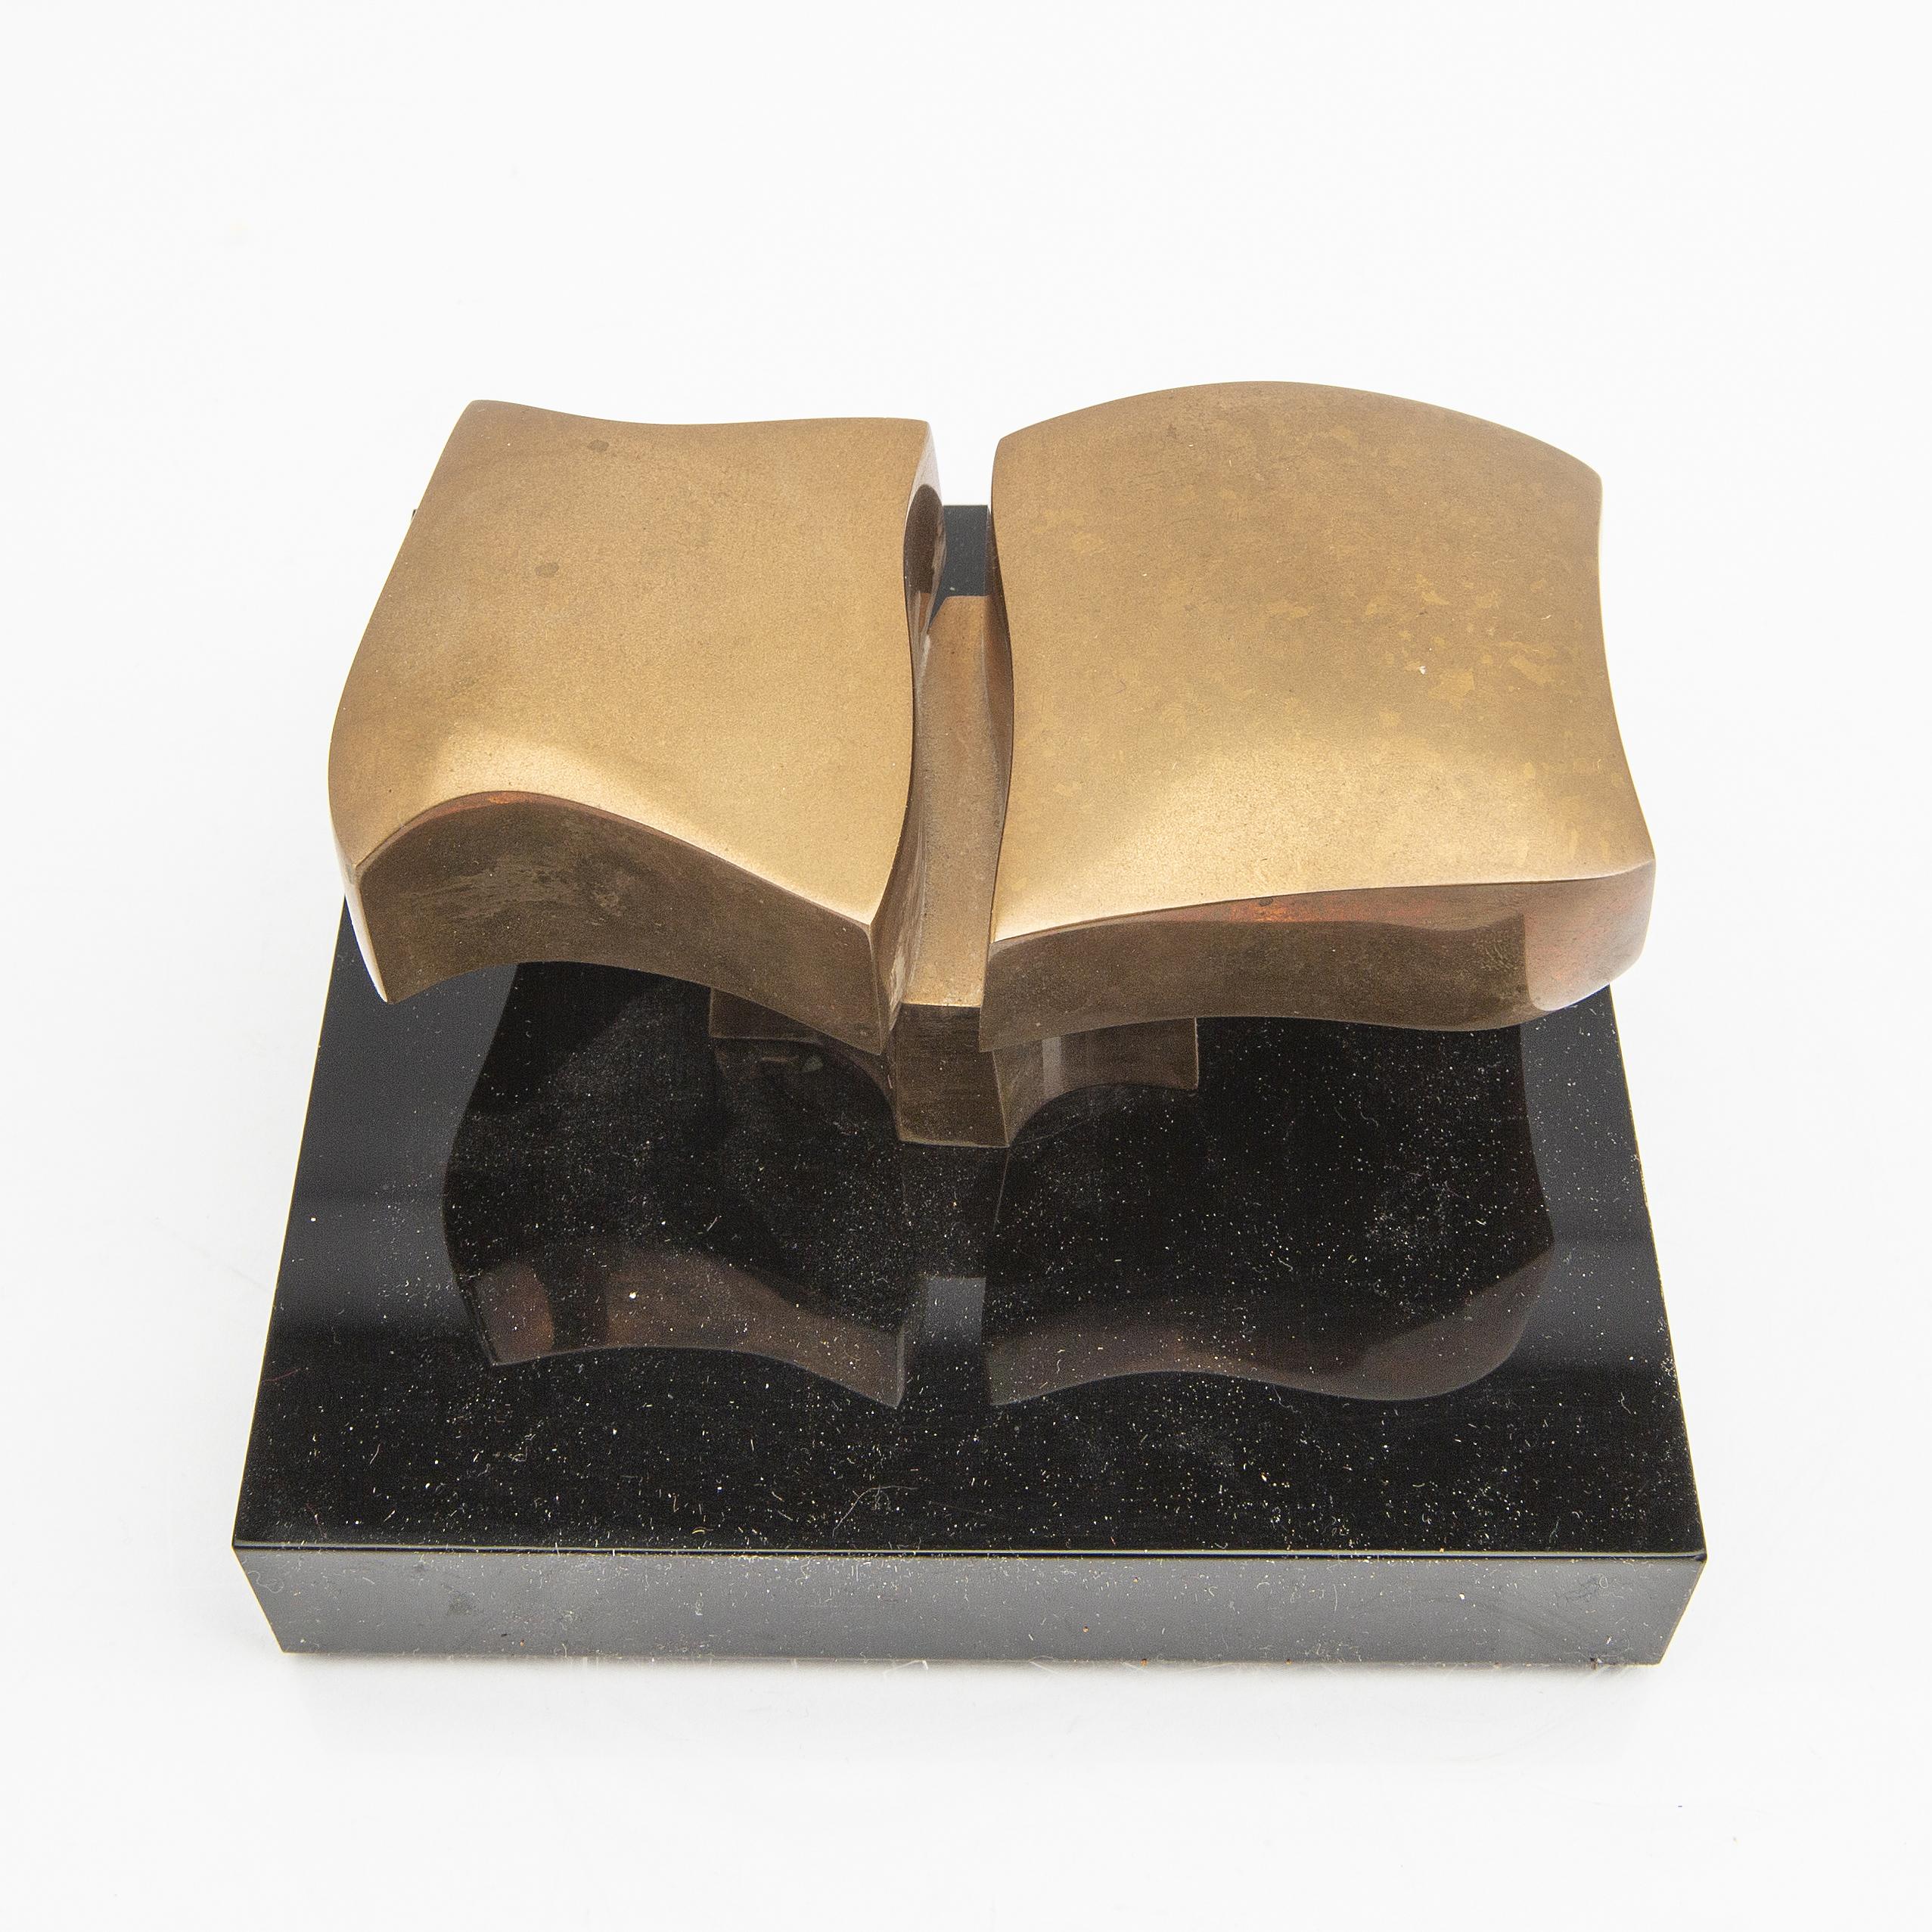 José Luis Sanchez (Spain, 1926-2018).
José Luis Sanchez, a signed and numbered 383 sculpture.
Fantastic abstract Brutalist shaped sculpture made and designed by Jose Luis Sanchez, Spain 1970s. This sculpture is made of solid bronze and has a